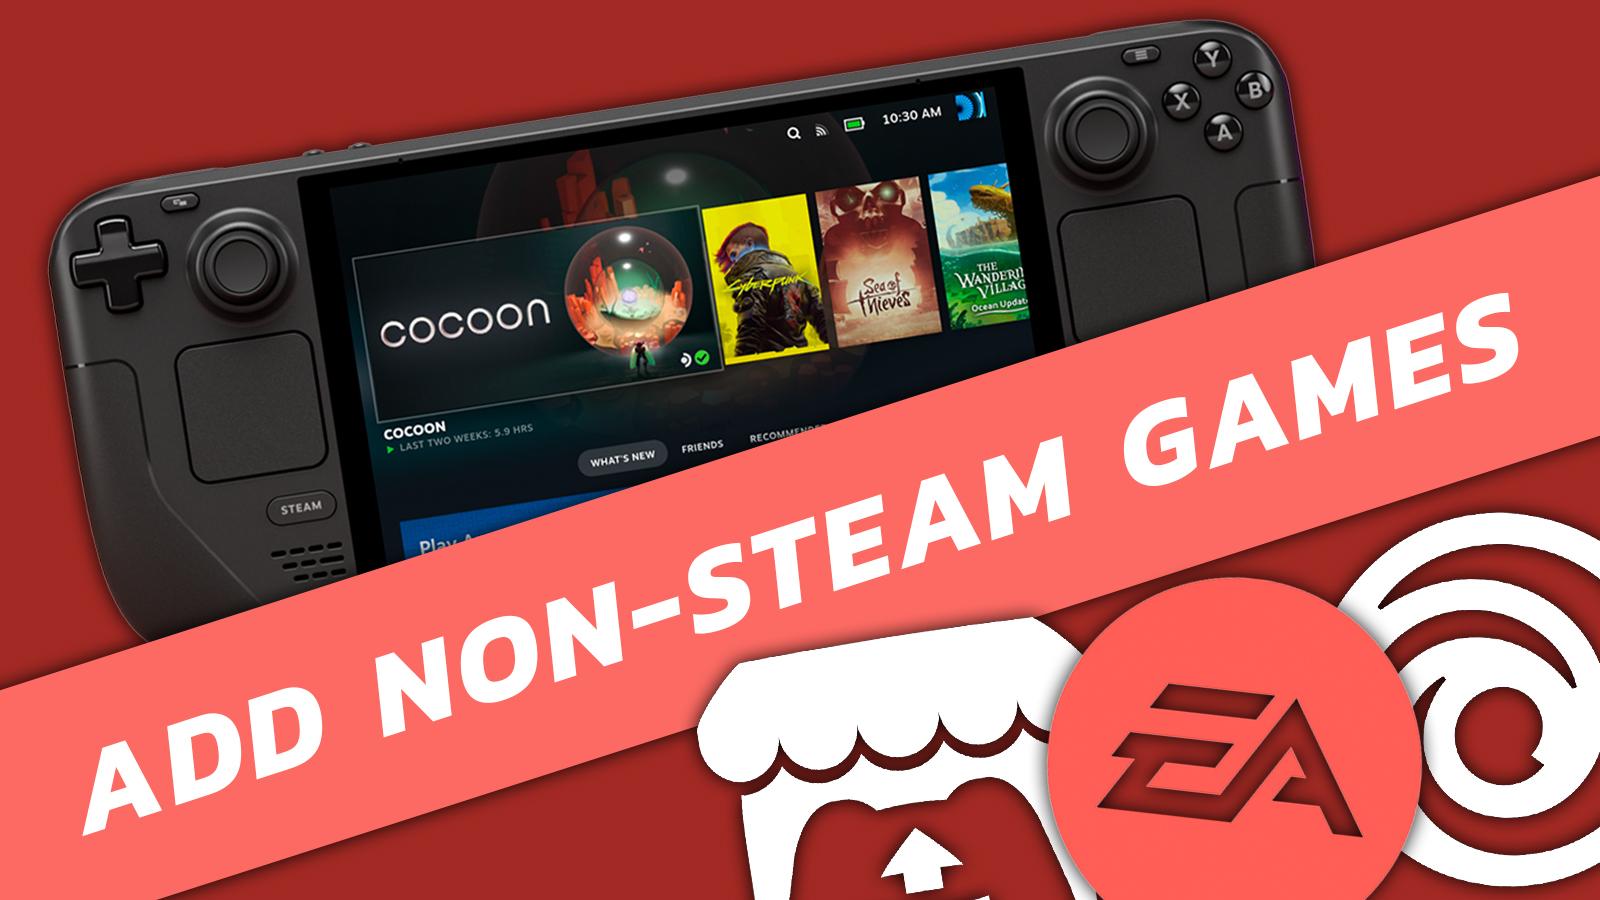 How to Get Free Games on Steam in 2 Different Ways